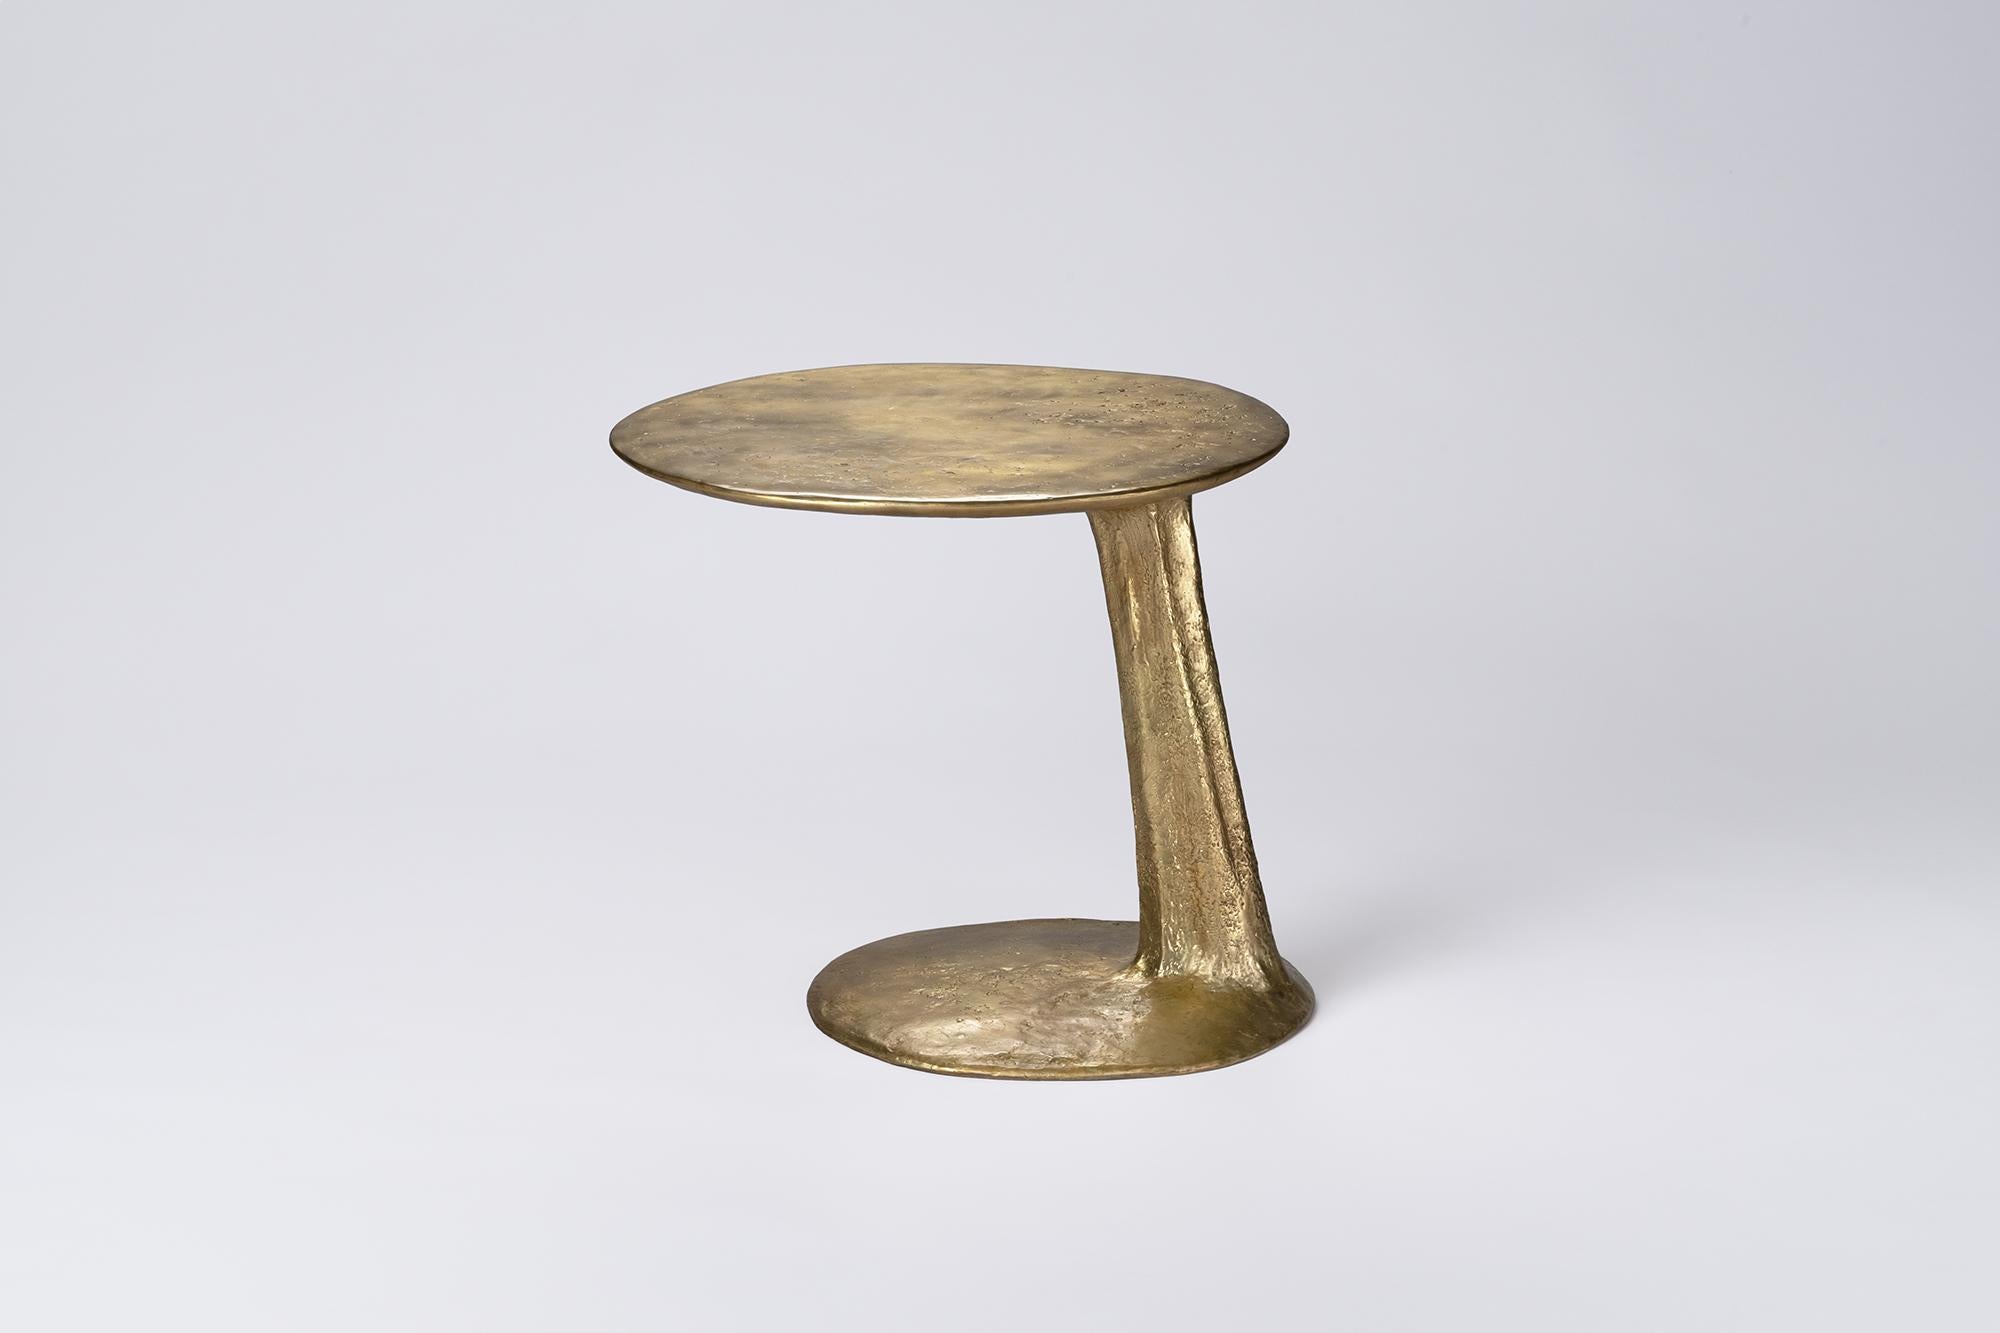 Natural Cast Brass Lava Large Side Table by Atelier V&F
Dimensions: D 52 x W 50 x H 46 cm. 
Materials: Cast brass with a natural finish.

Available in different finishes (cast, black and silver). Available in two different sizes. Prices may vary.